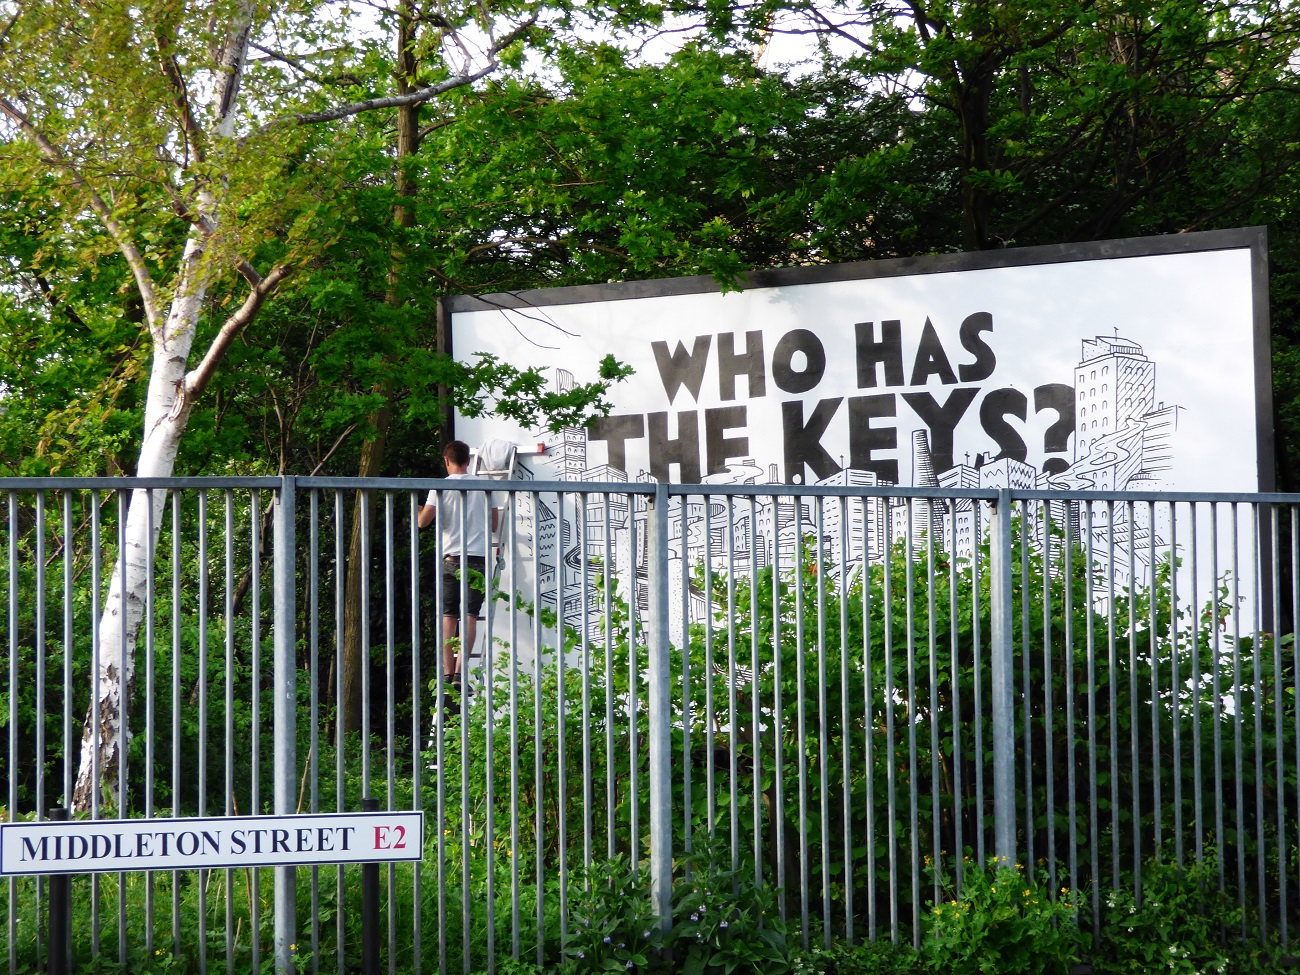 20160505_Tower-Hamlets_Bethnal-Green-Nature-Reserve-Phytology_Who-Has-The-Keys